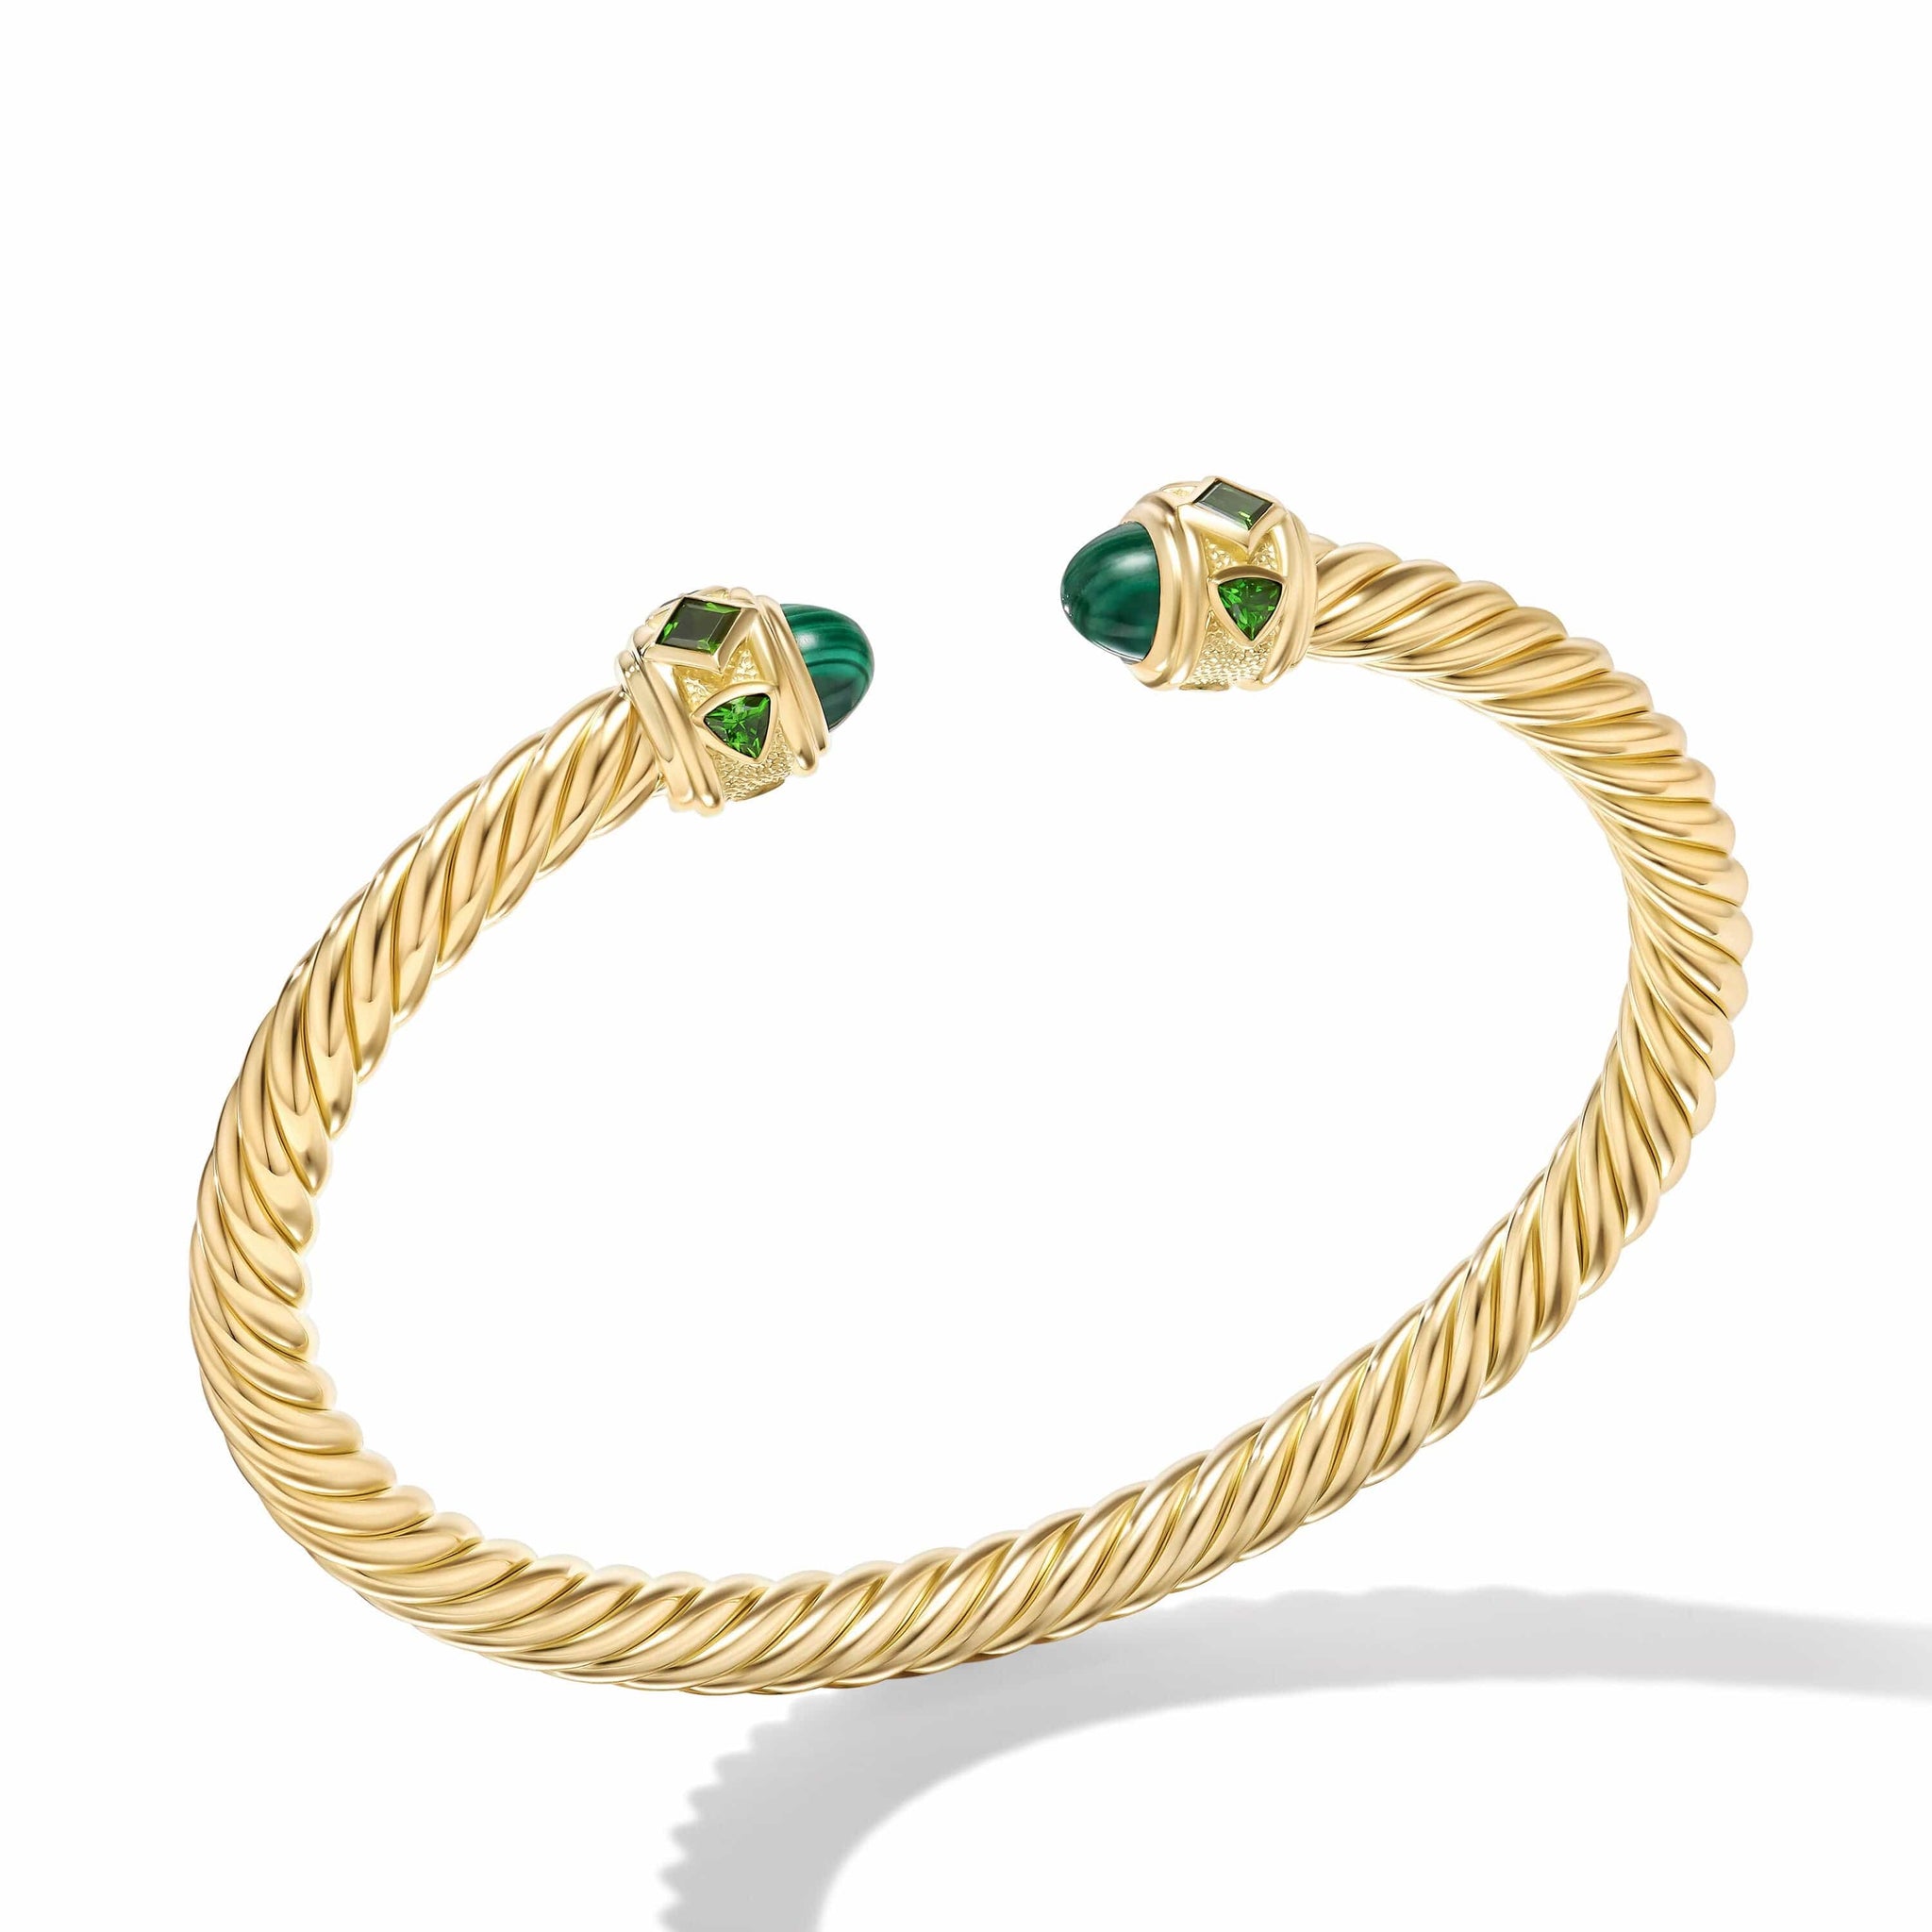 Renaissance® Bracelet in 18K Yellow Gold with Malachite and Chrome Diopside